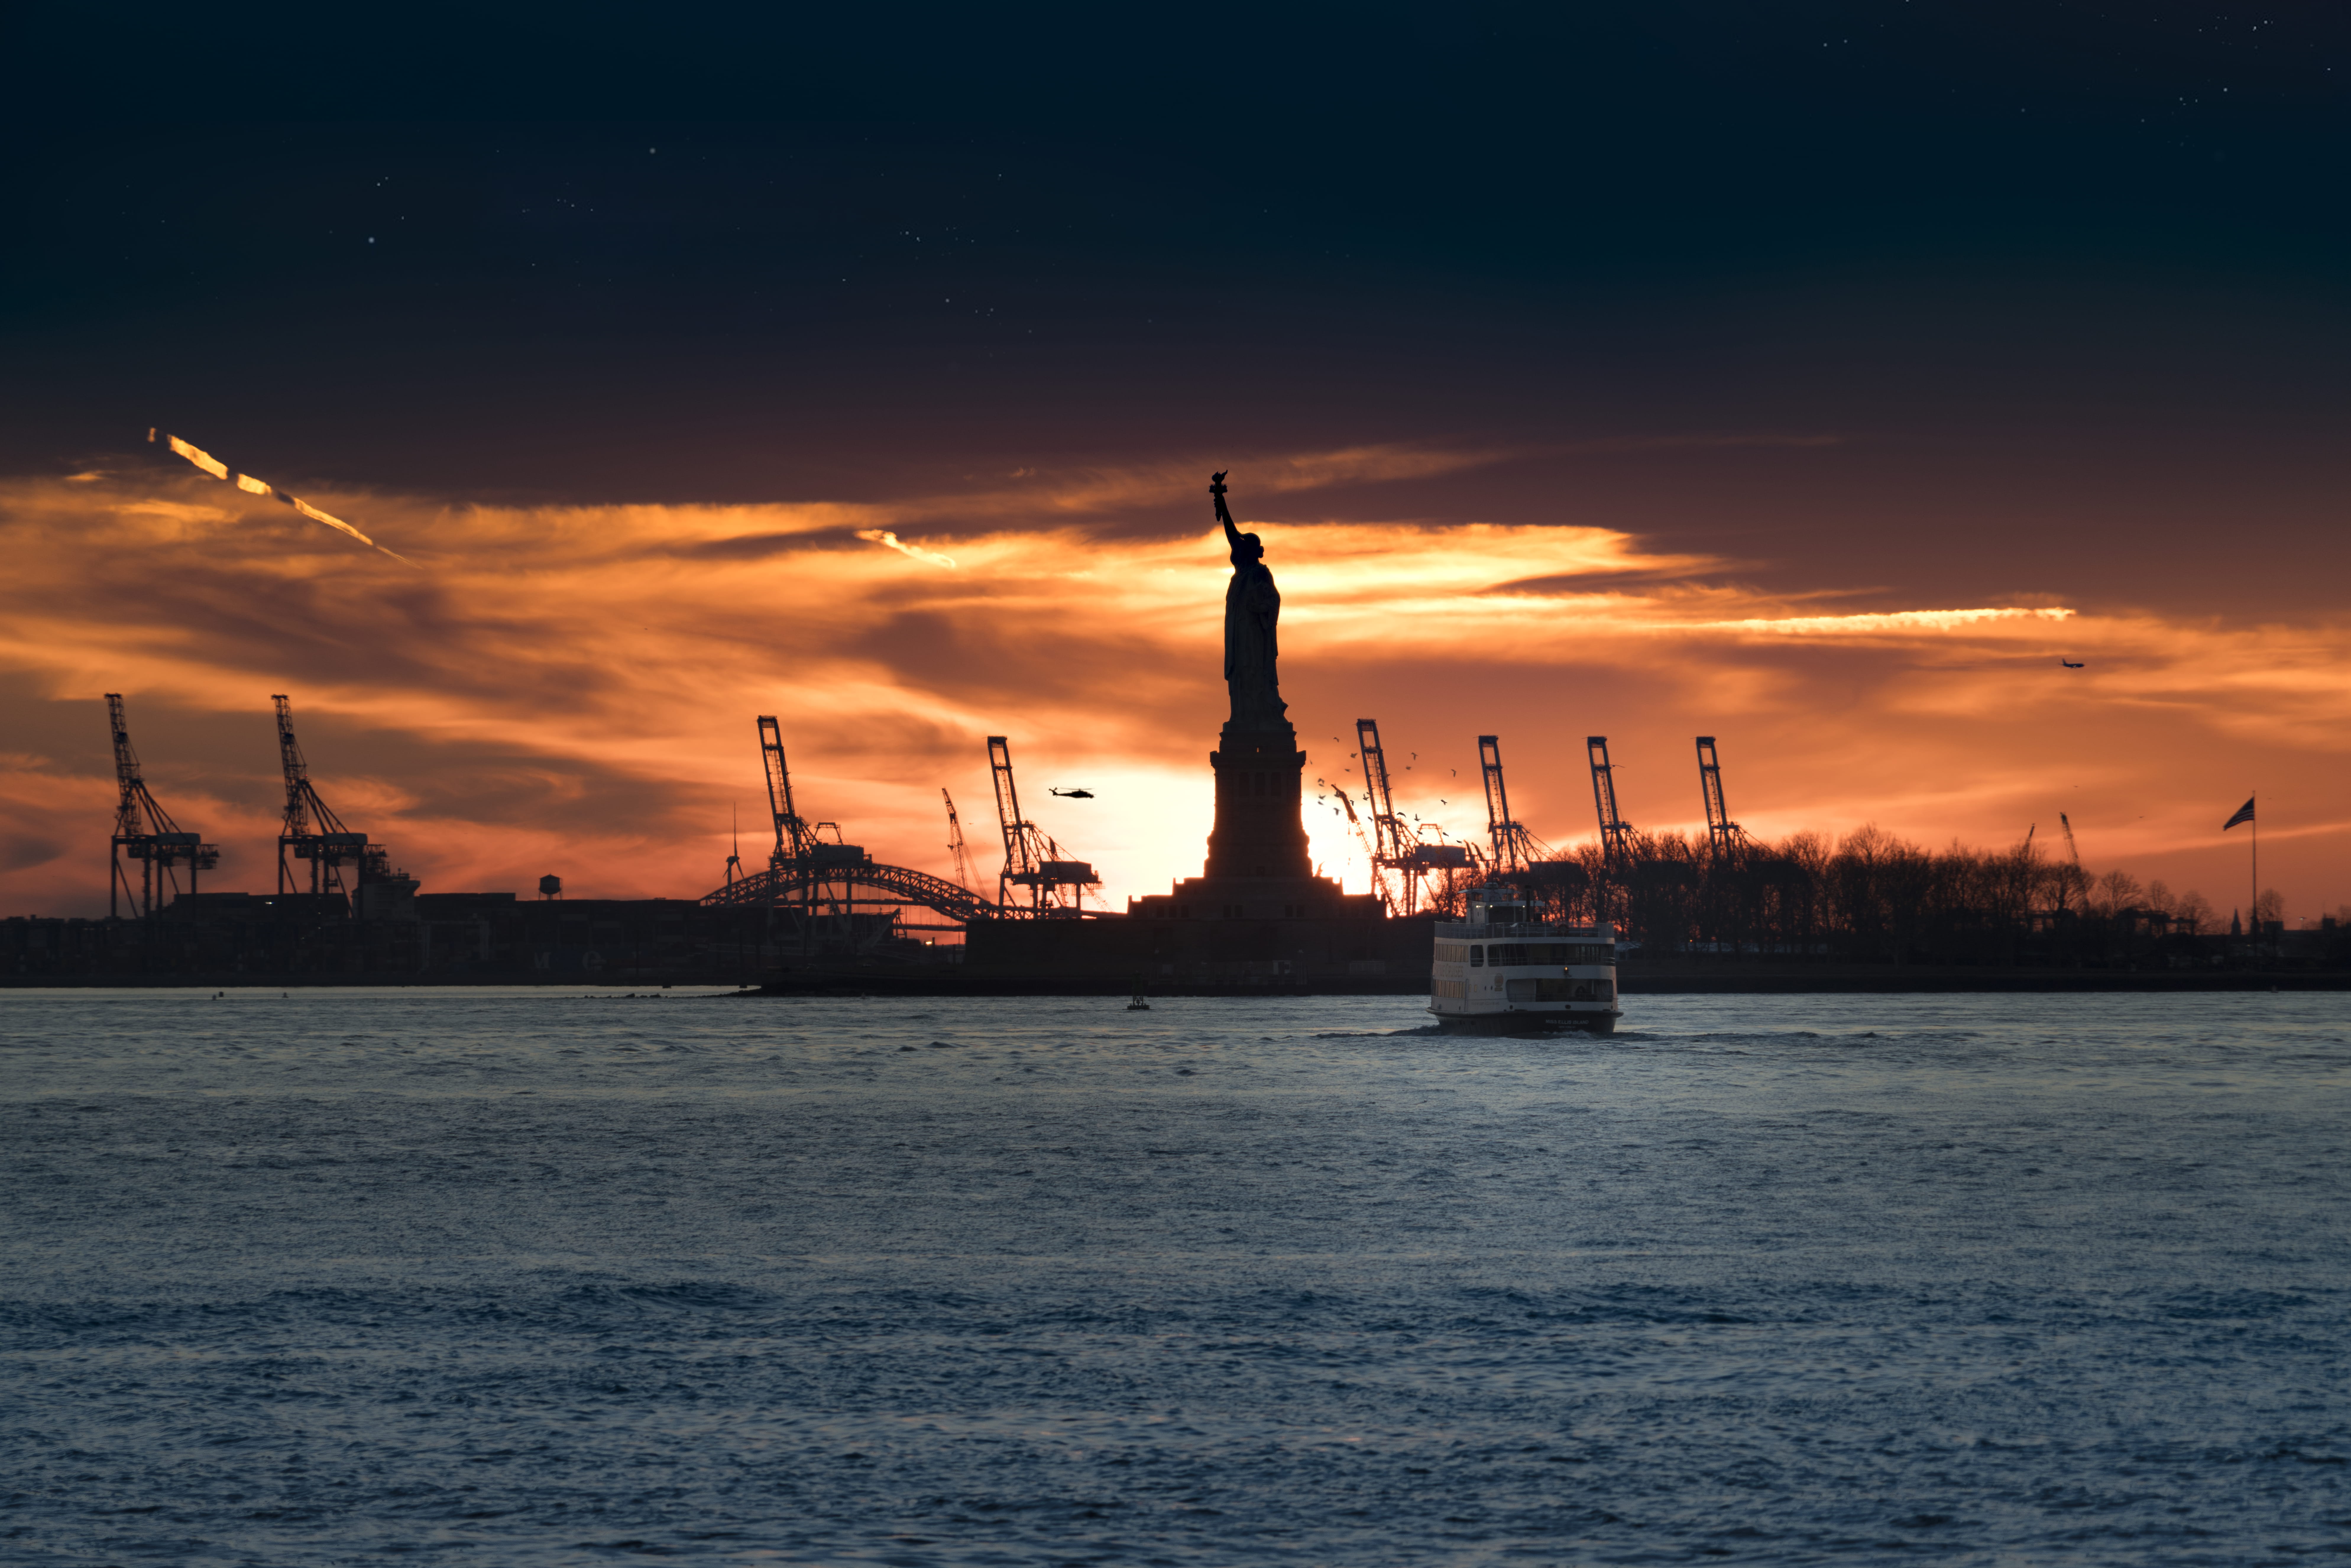 silhouette of Statue of Liberty near body of water, silhouette of Statue of Liberty during sunset